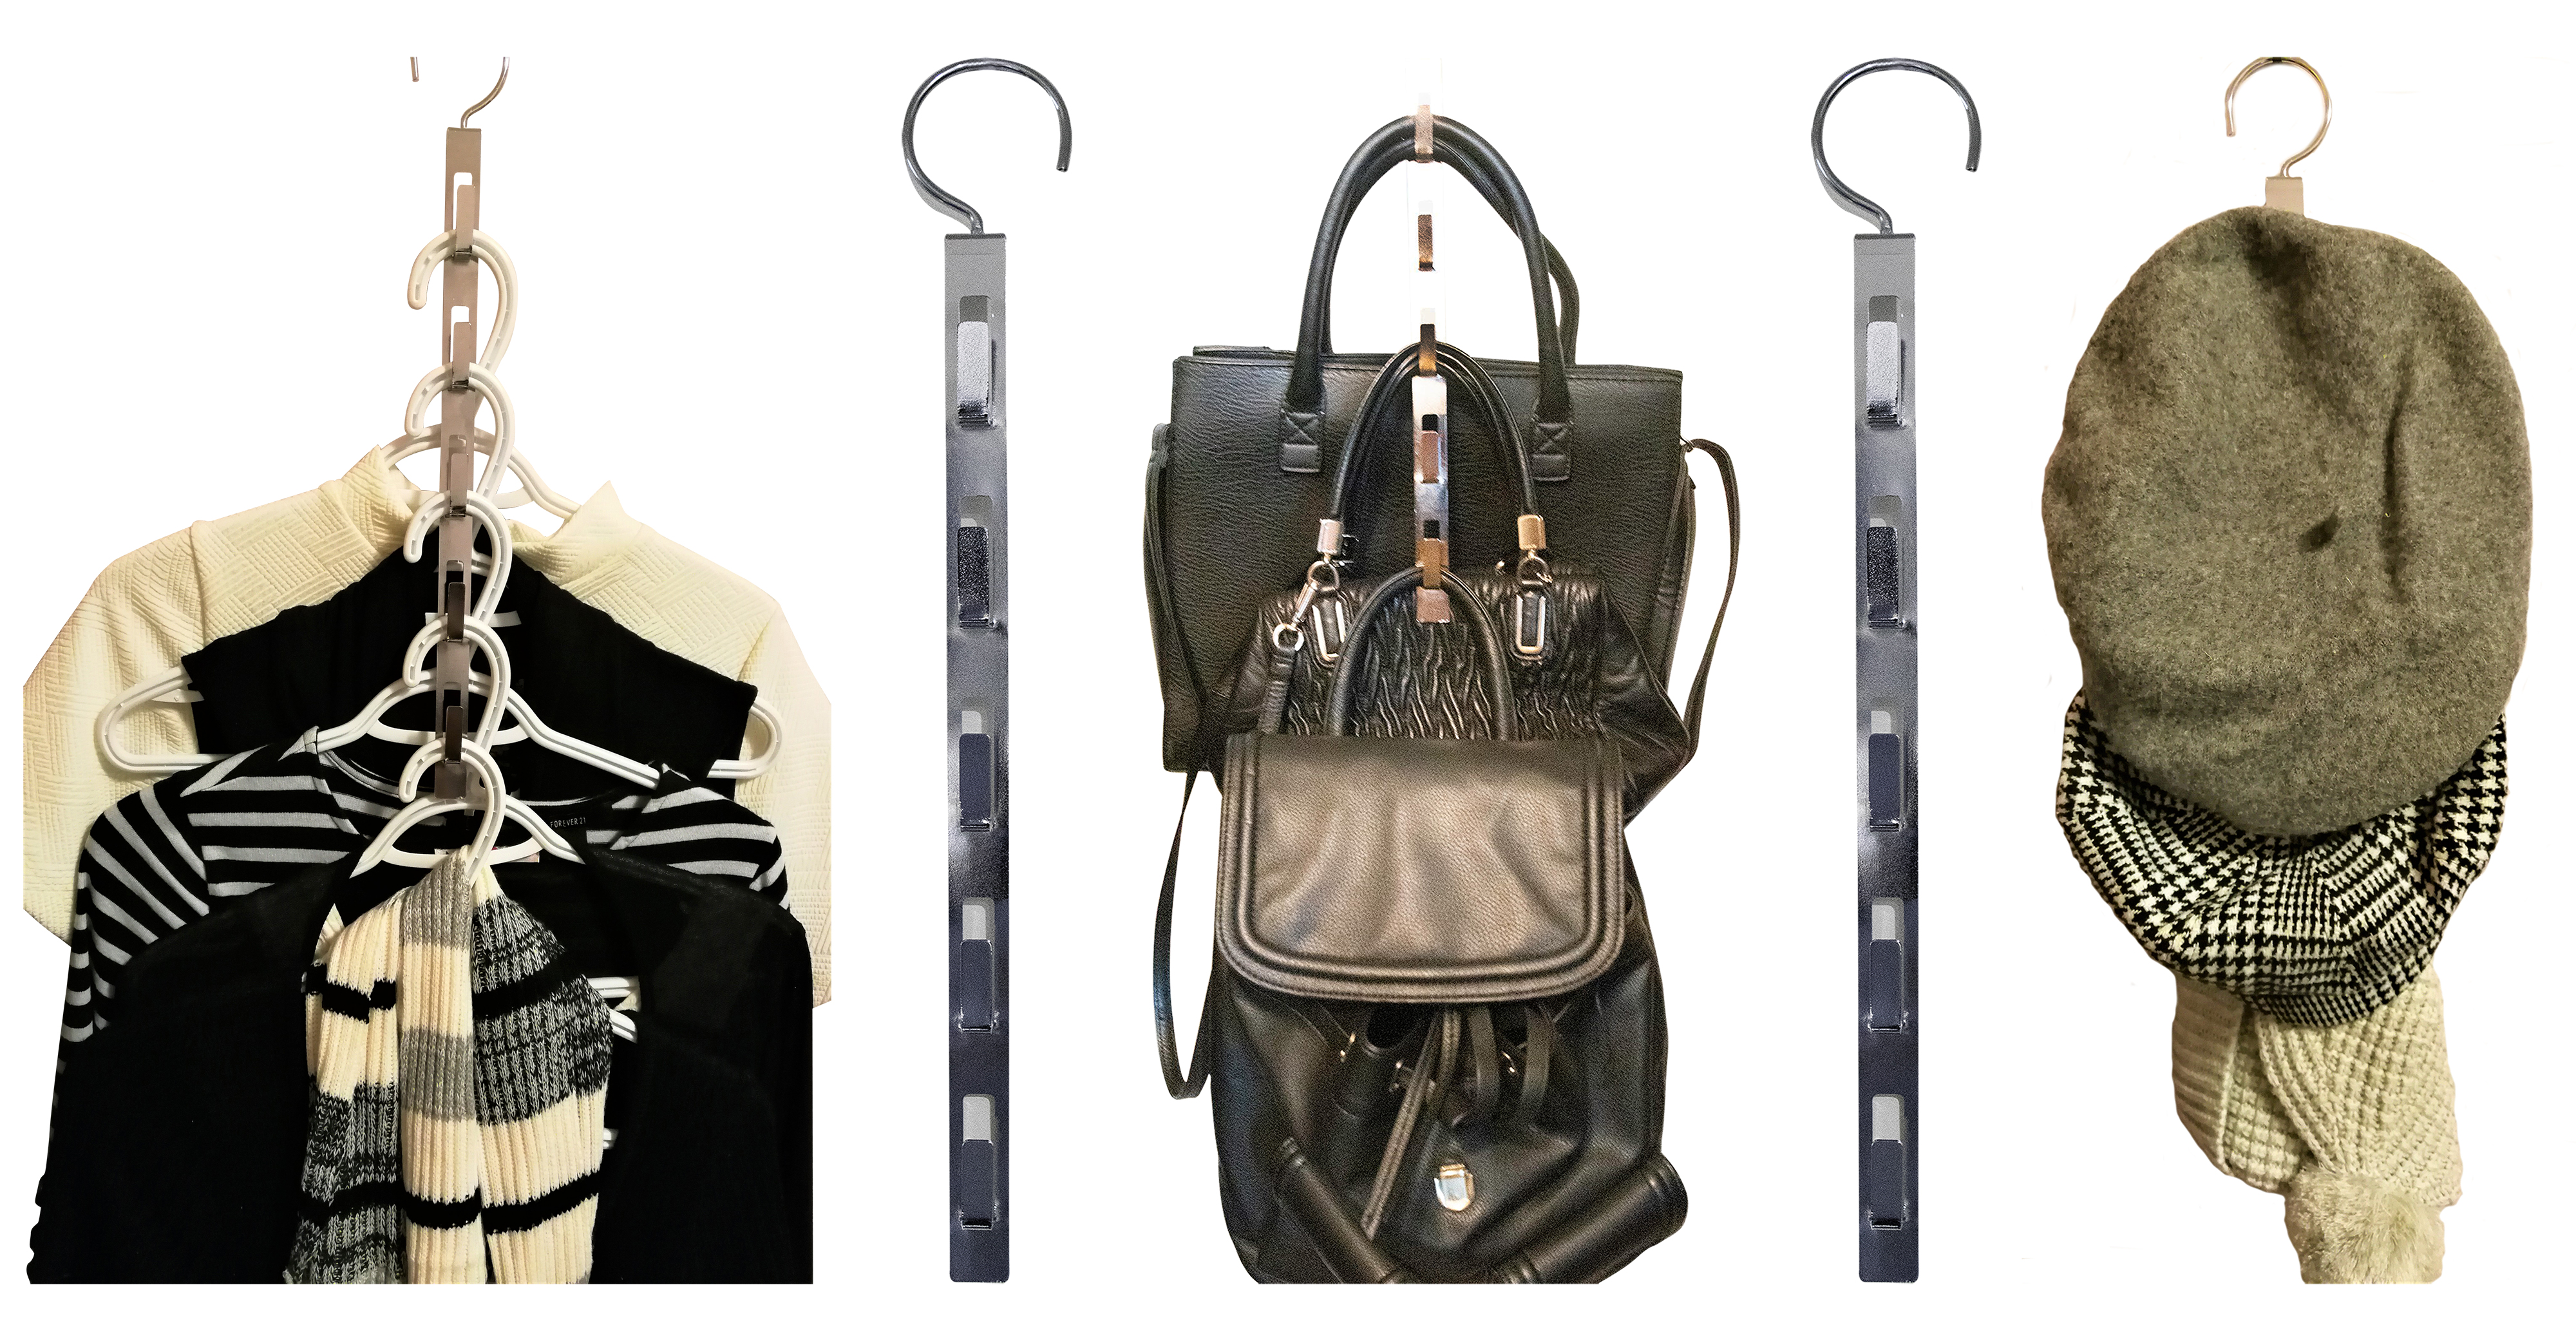 D'klutz multifuntional hanger that hangs office dress, bags, hats black and white colors)